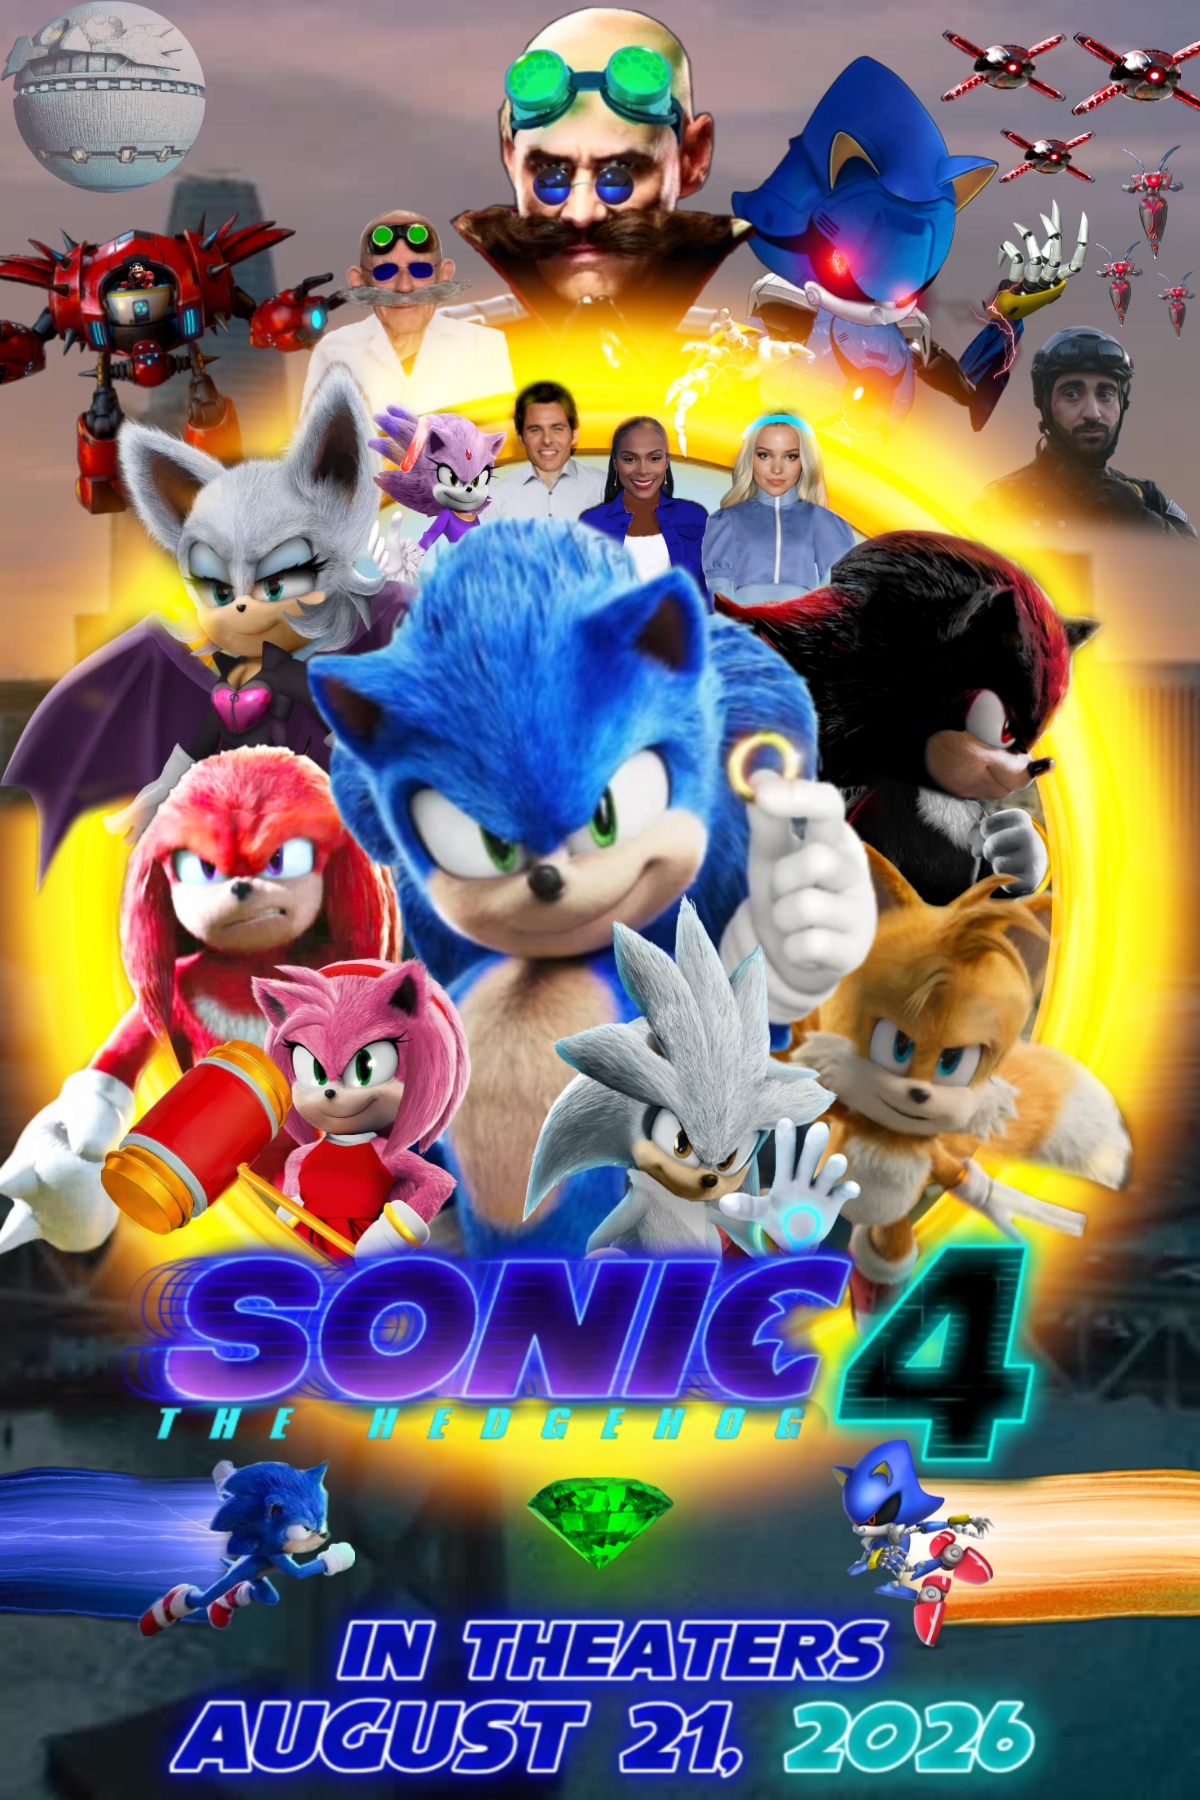 Sonic Prime Season 3 - Teaser Poster (Fanmade( by heybolol on